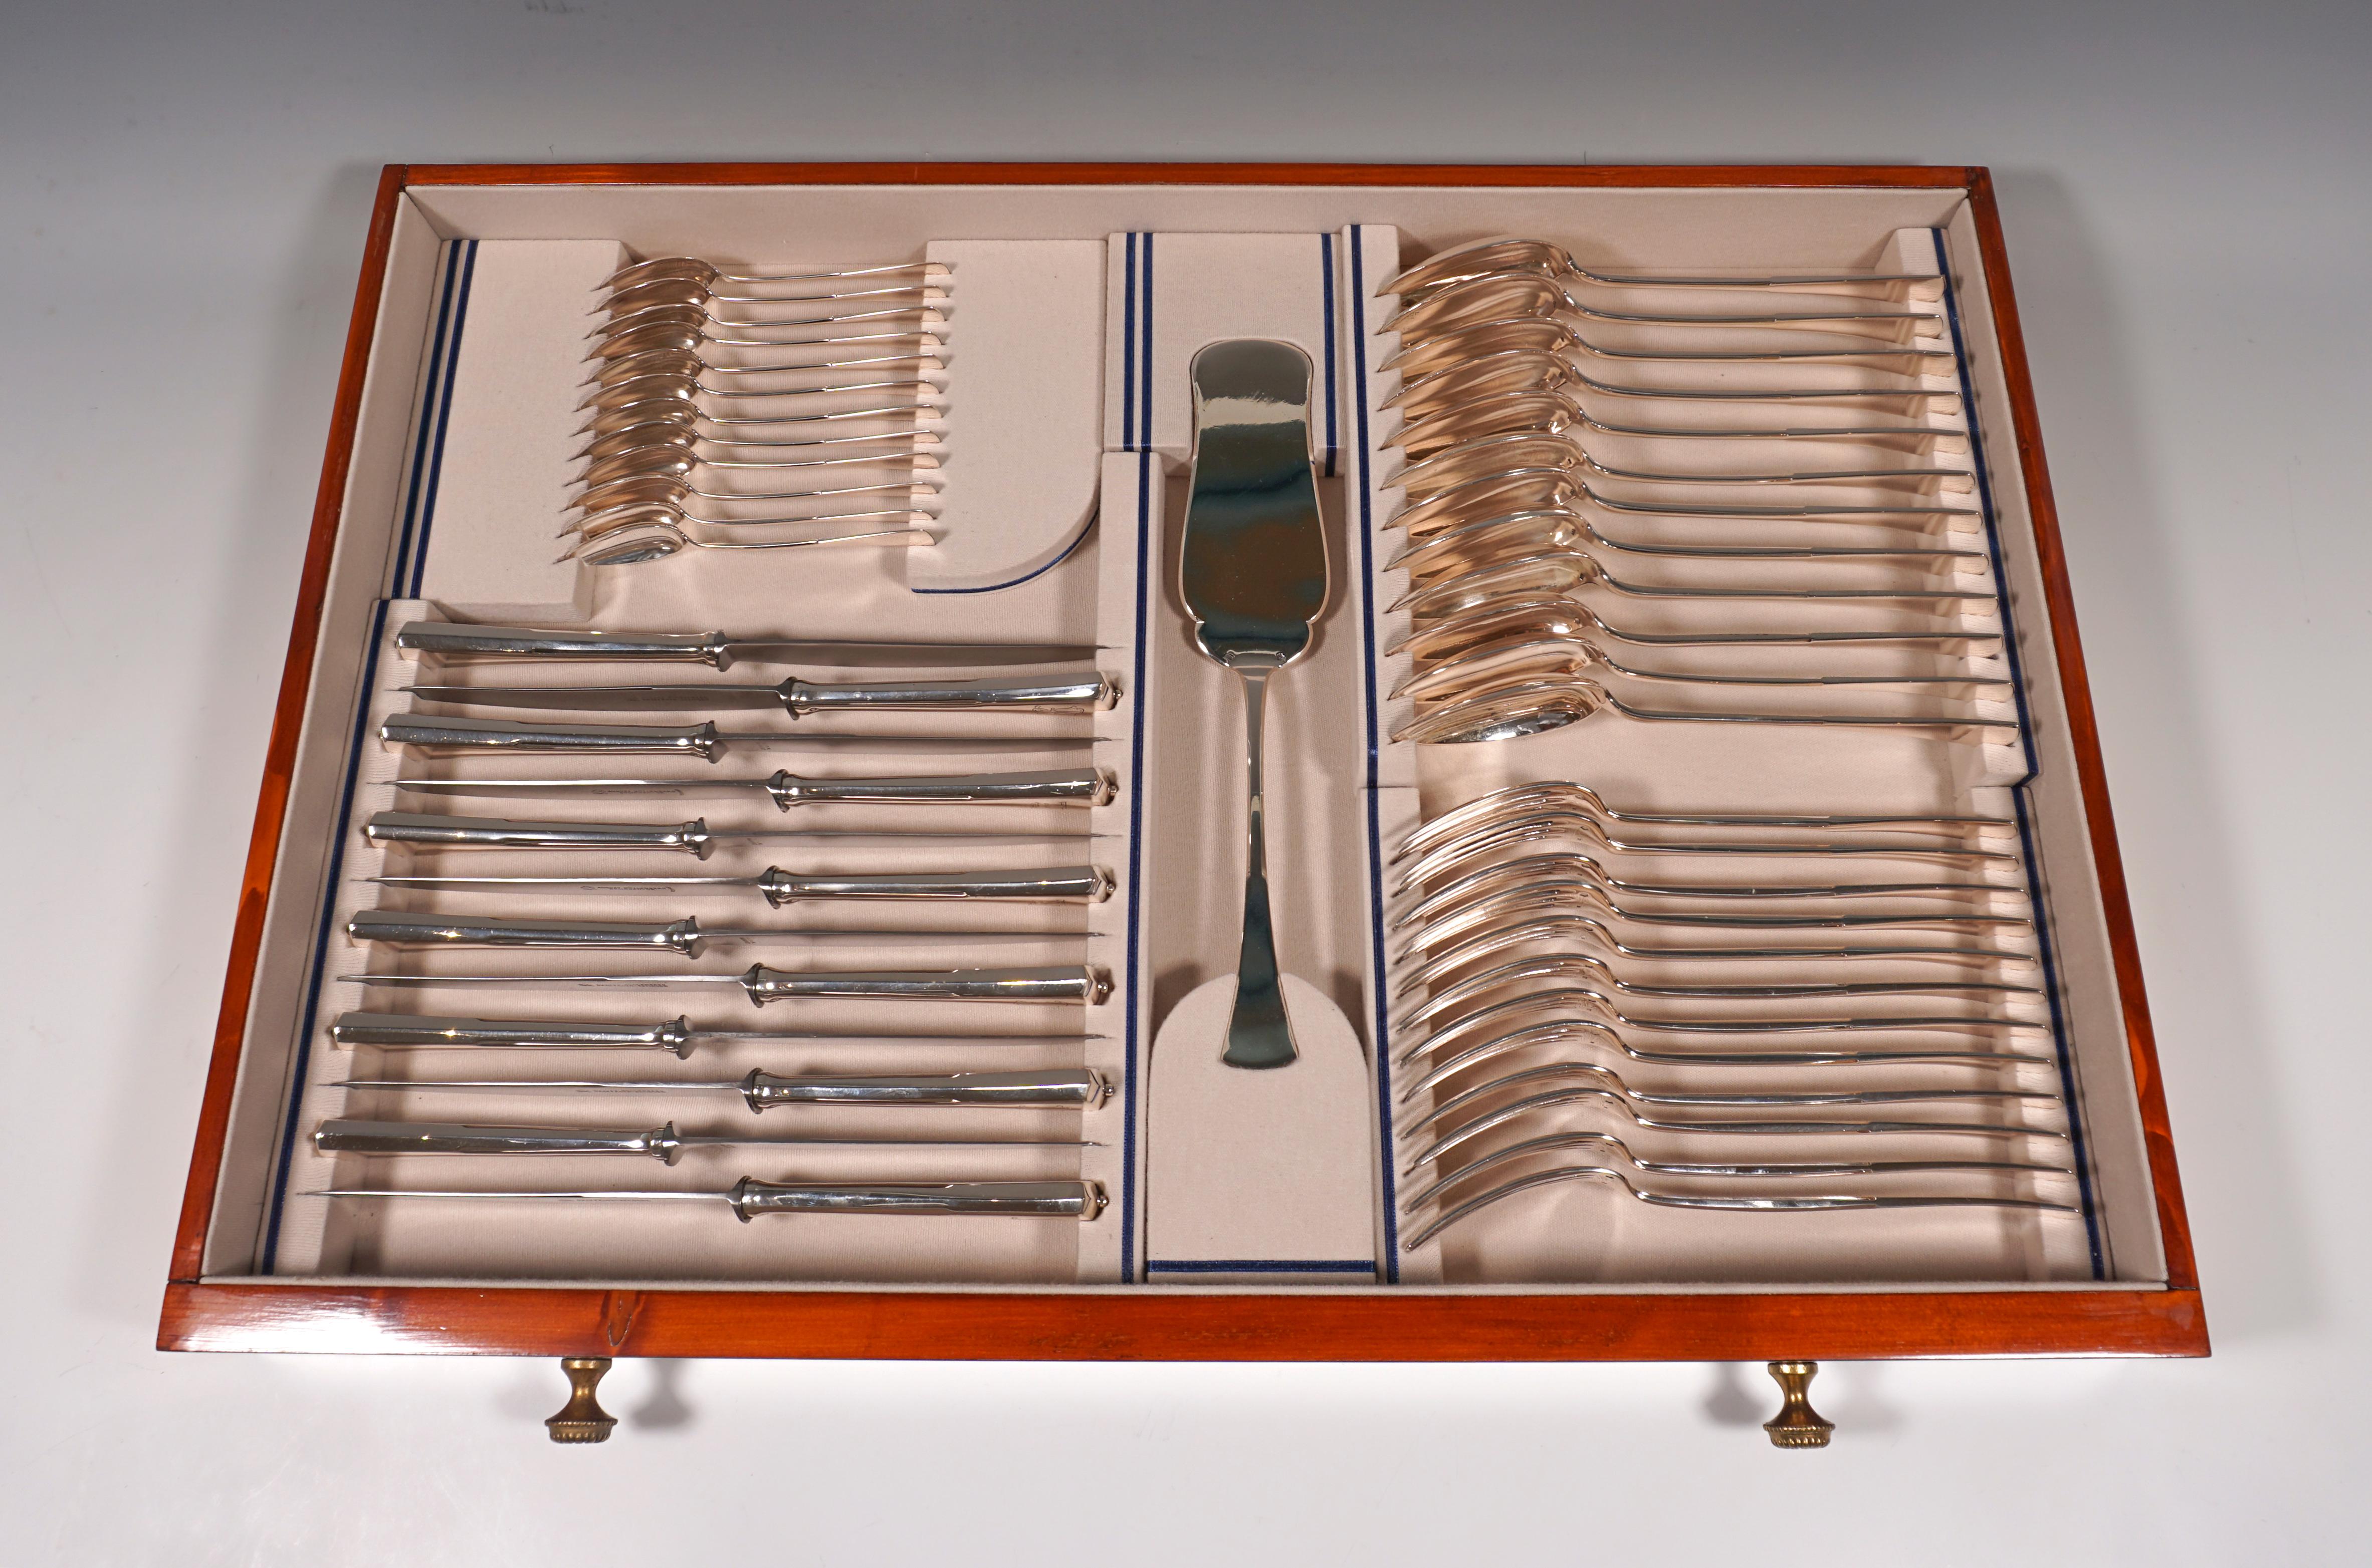 Hand-Crafted Art Nouveau Silver Cutlery Set For 12 People In Showcase, Austria-Hungary, 1920